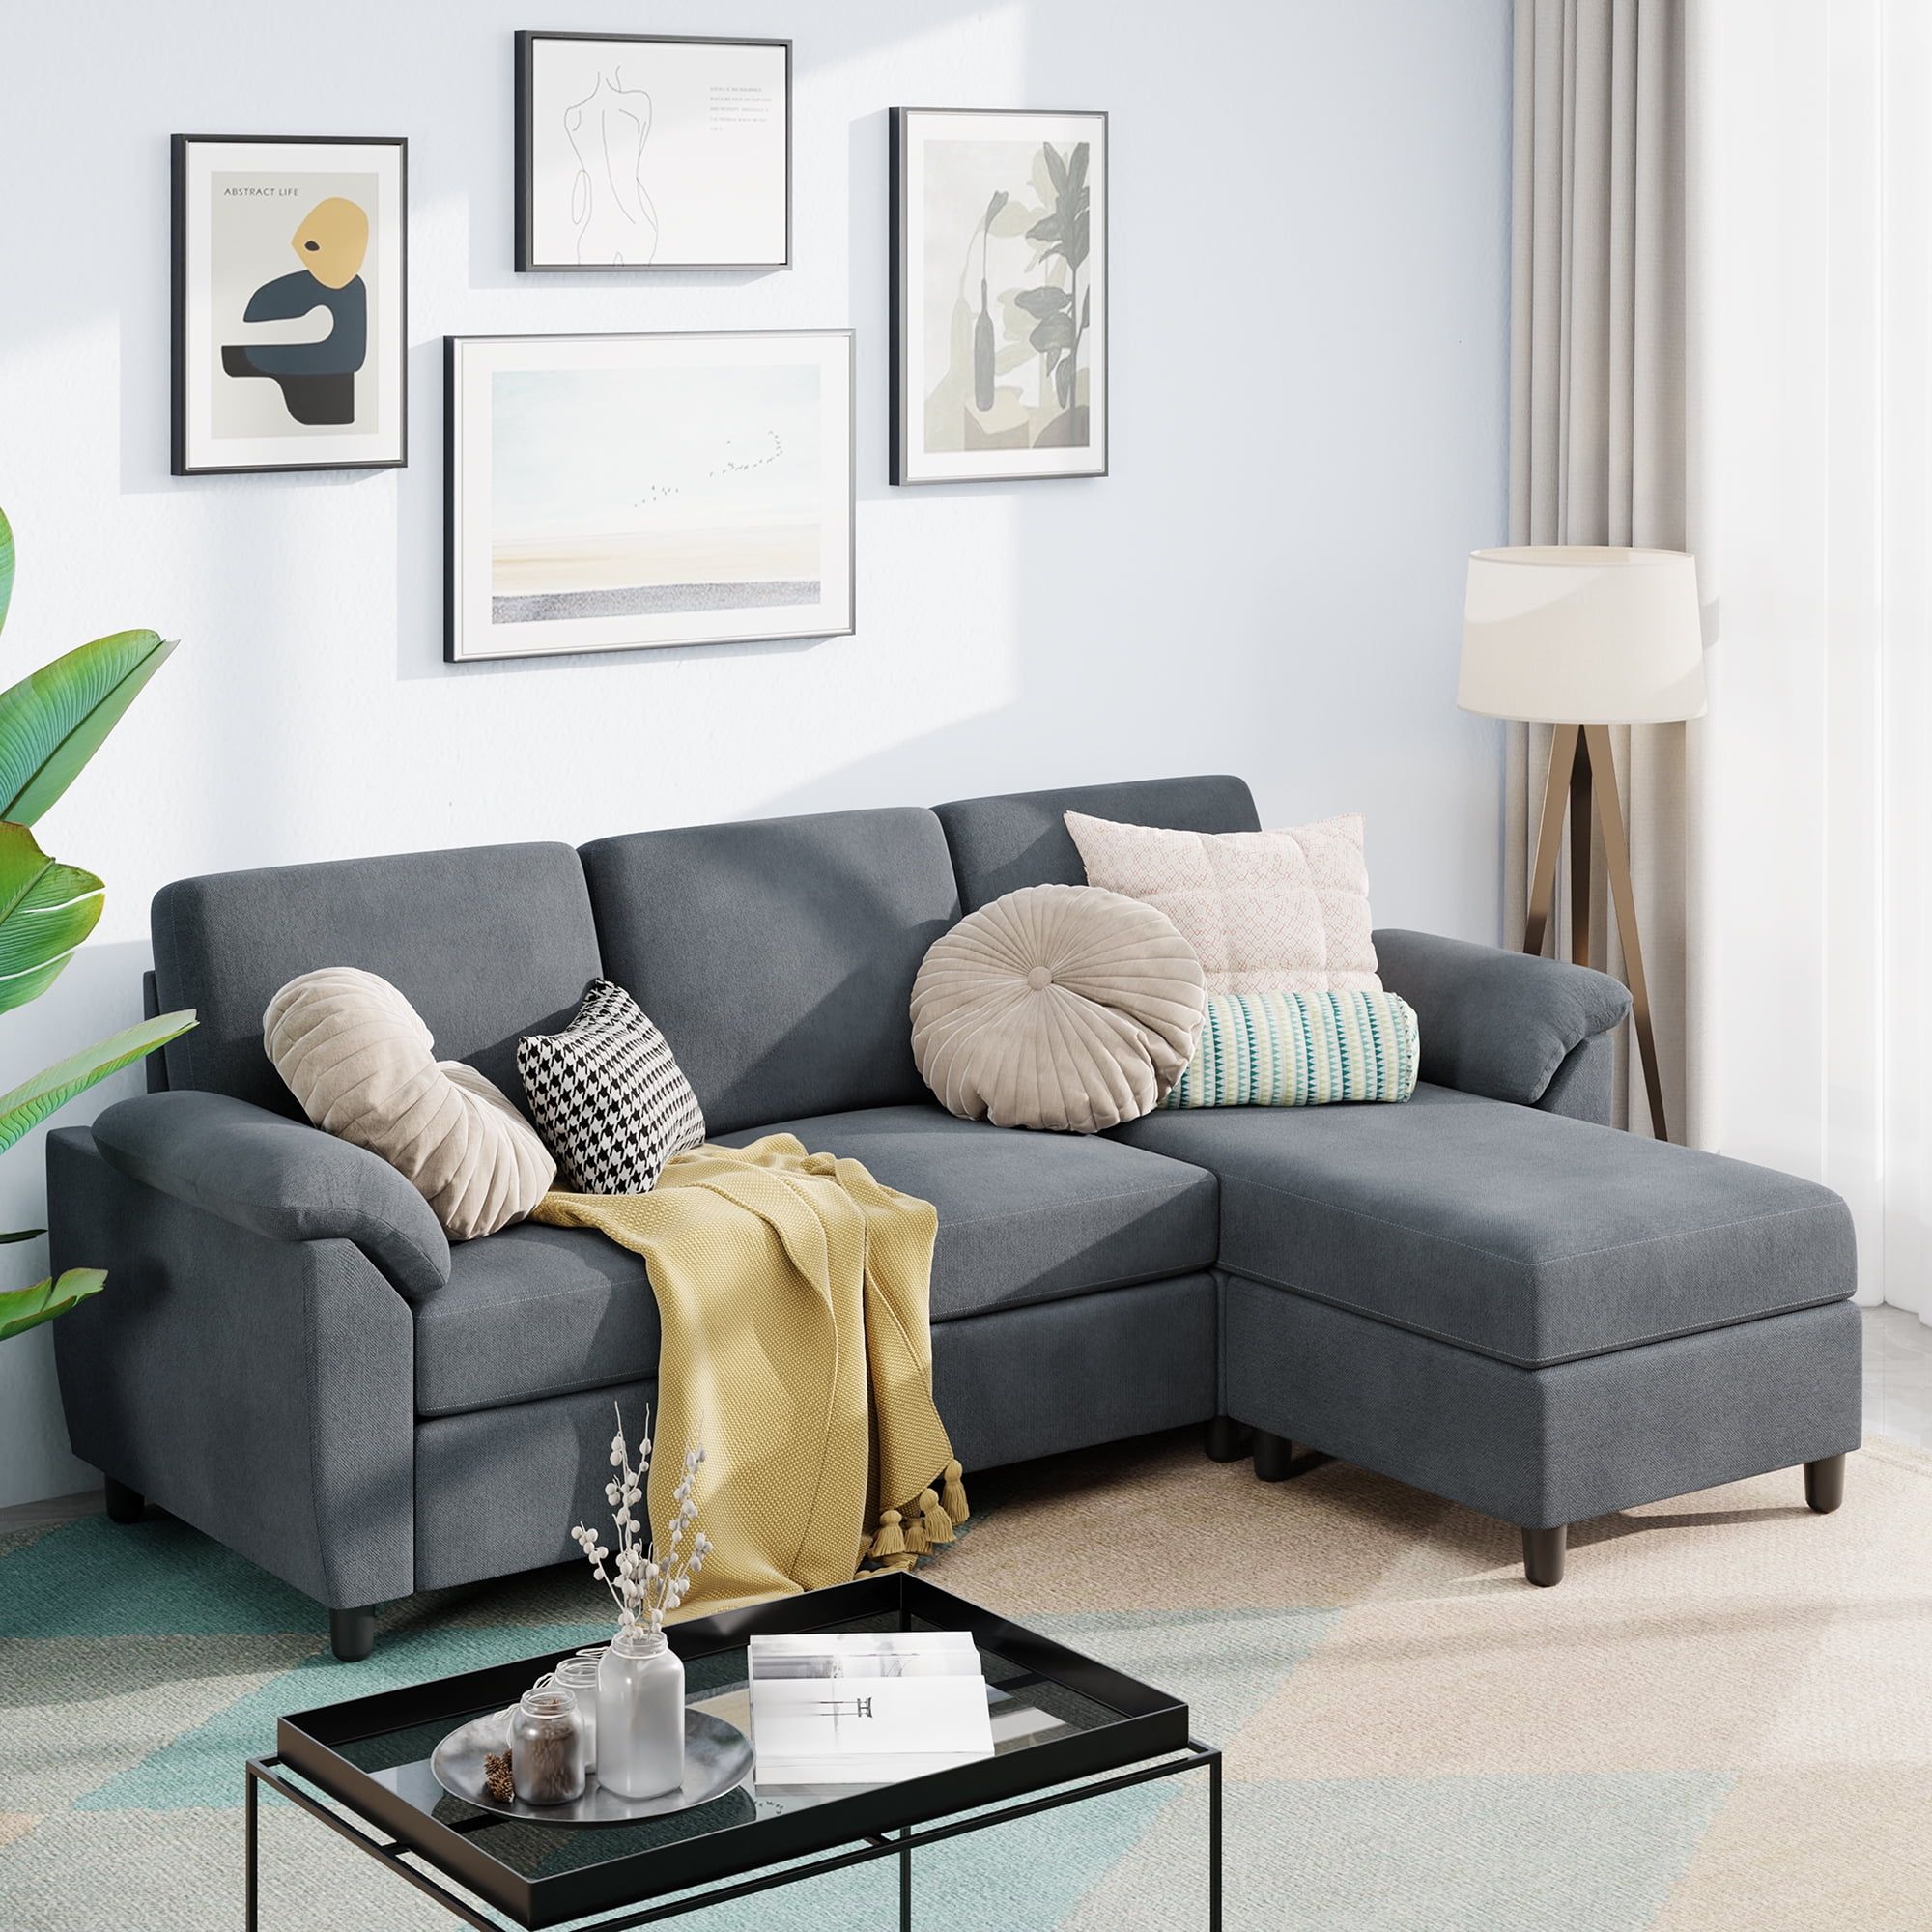 Sobaniilo 79" Convertible Sectional Sofa Couch, 3 Seat L Shaped Sofa With  Removable Pillows Linen Fabric Small Couch Mid Century For Living Room,  Apartment And Office (Gray) – Walmart Within 3 Seat Convertible Sectional Sofas (View 5 of 15)